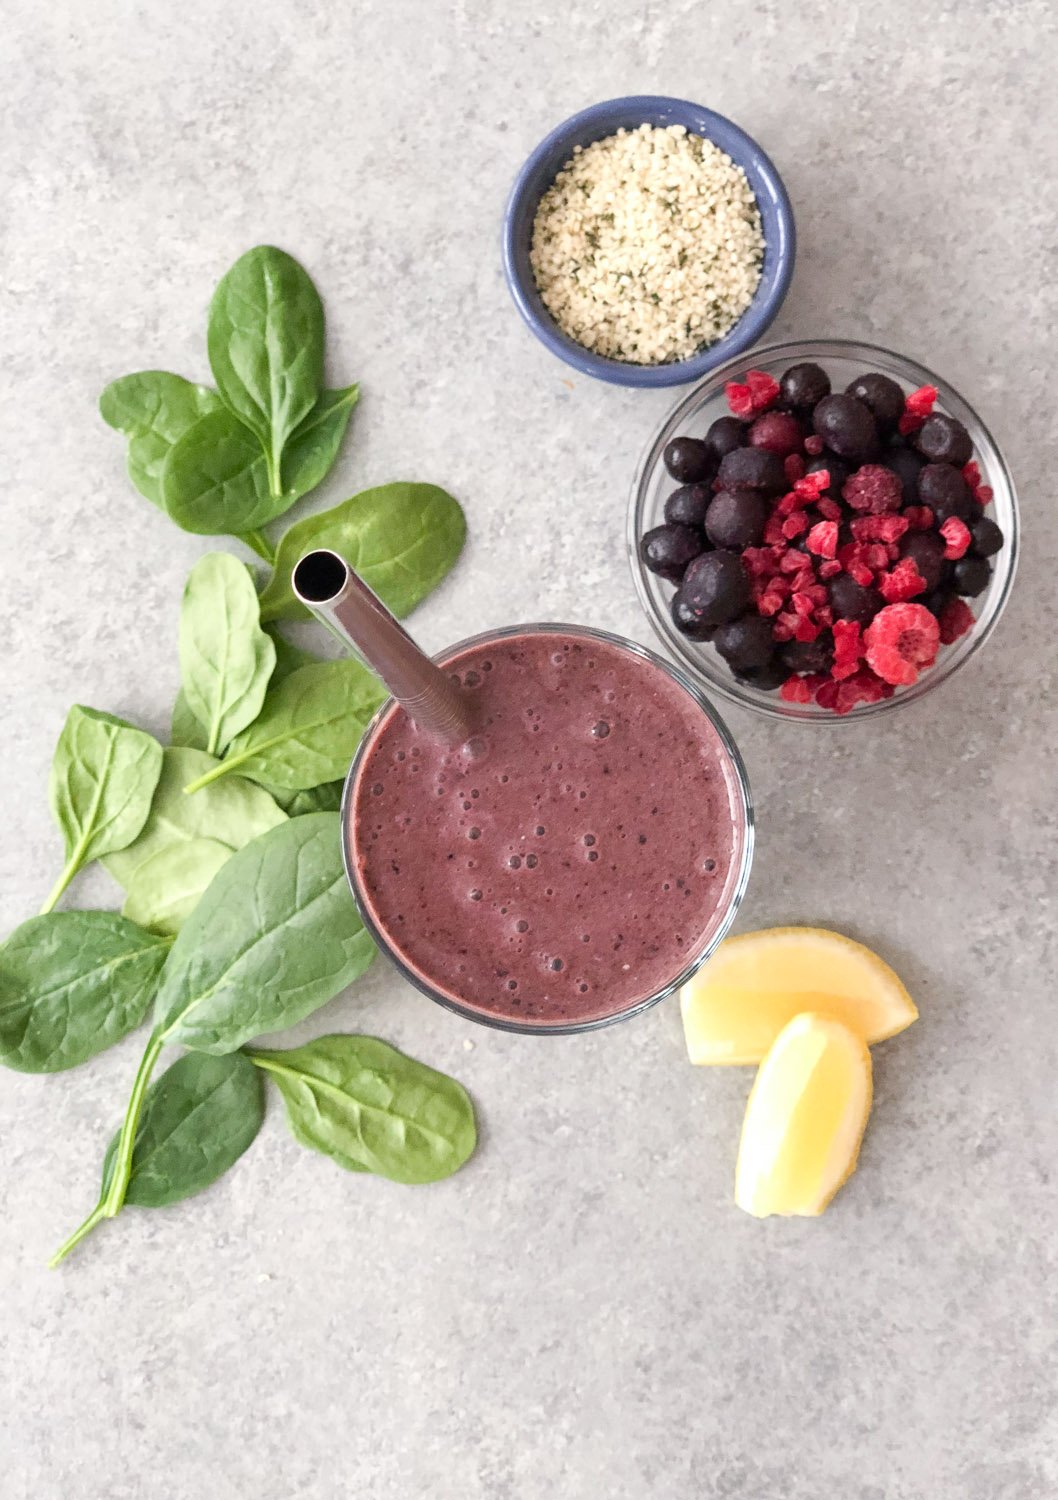 Glass of green berry smoothie from above with metal straw surrounded by a dish of seeds, dish of frozen berries, a couple slices of lemon, and some spinach leaves.